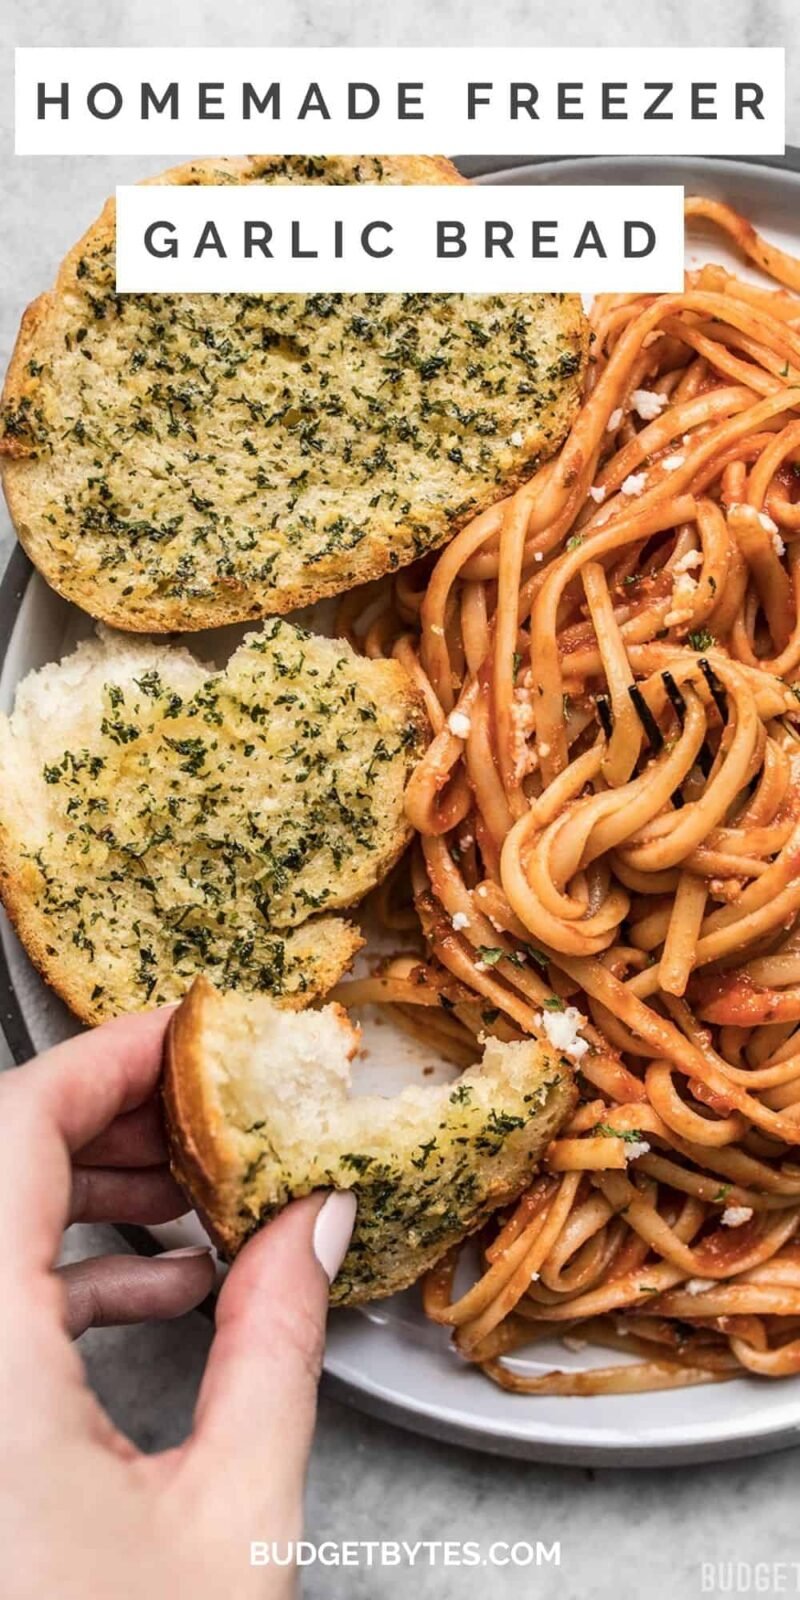 Pieces of garlic bread on a plate of pasta, title text at the top